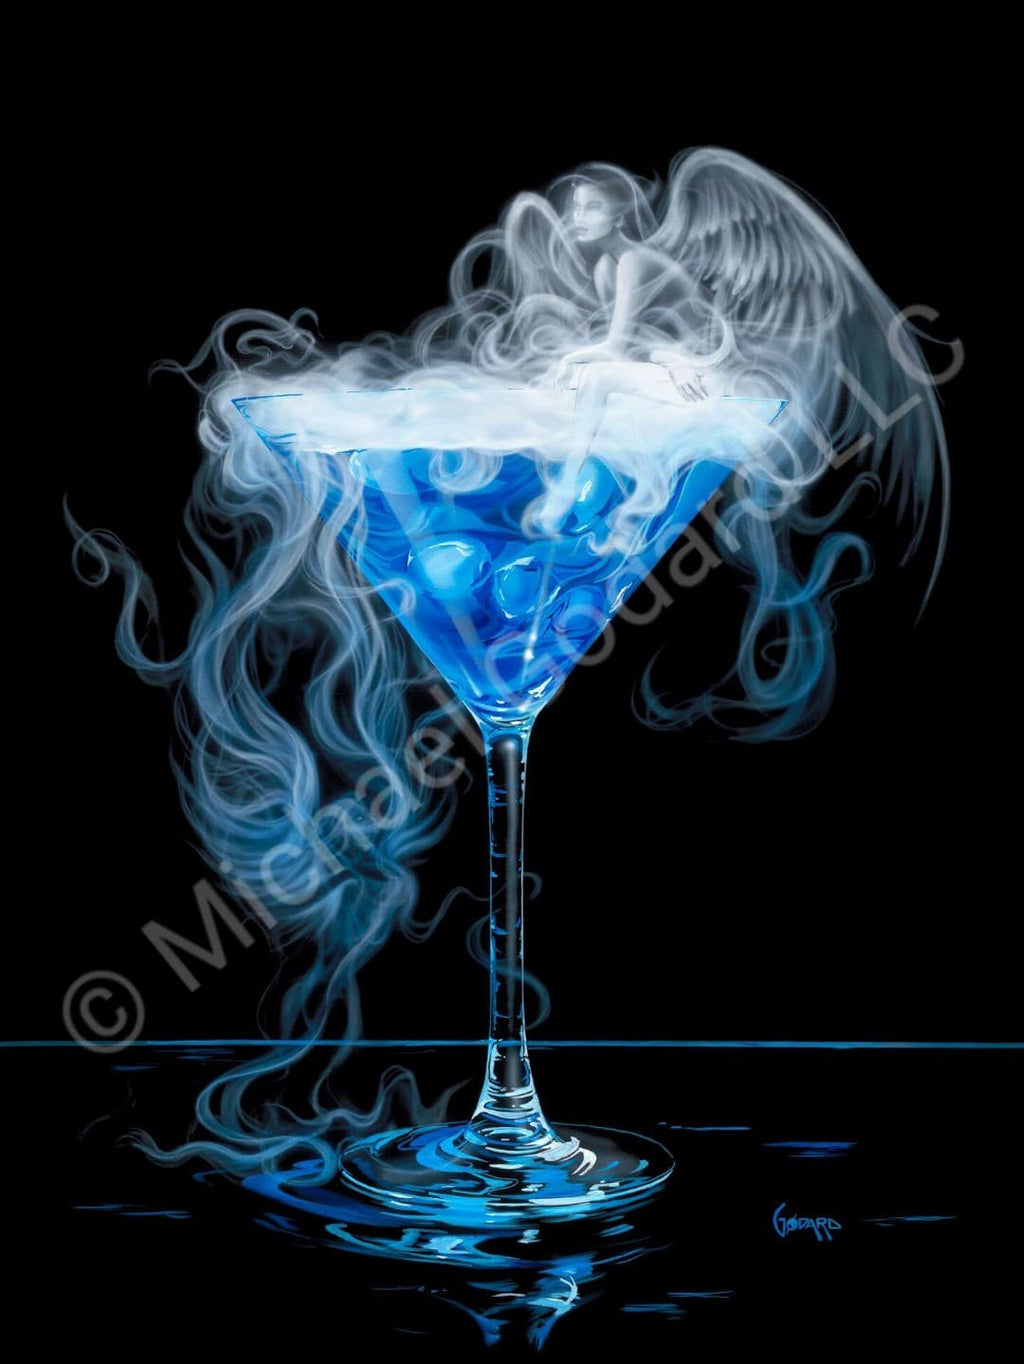 Black background canvas. A martini glass full of beautiful blue with a wispy white angel next to the glass and one on top of the "smoky" martini glass. Very whimsical. 